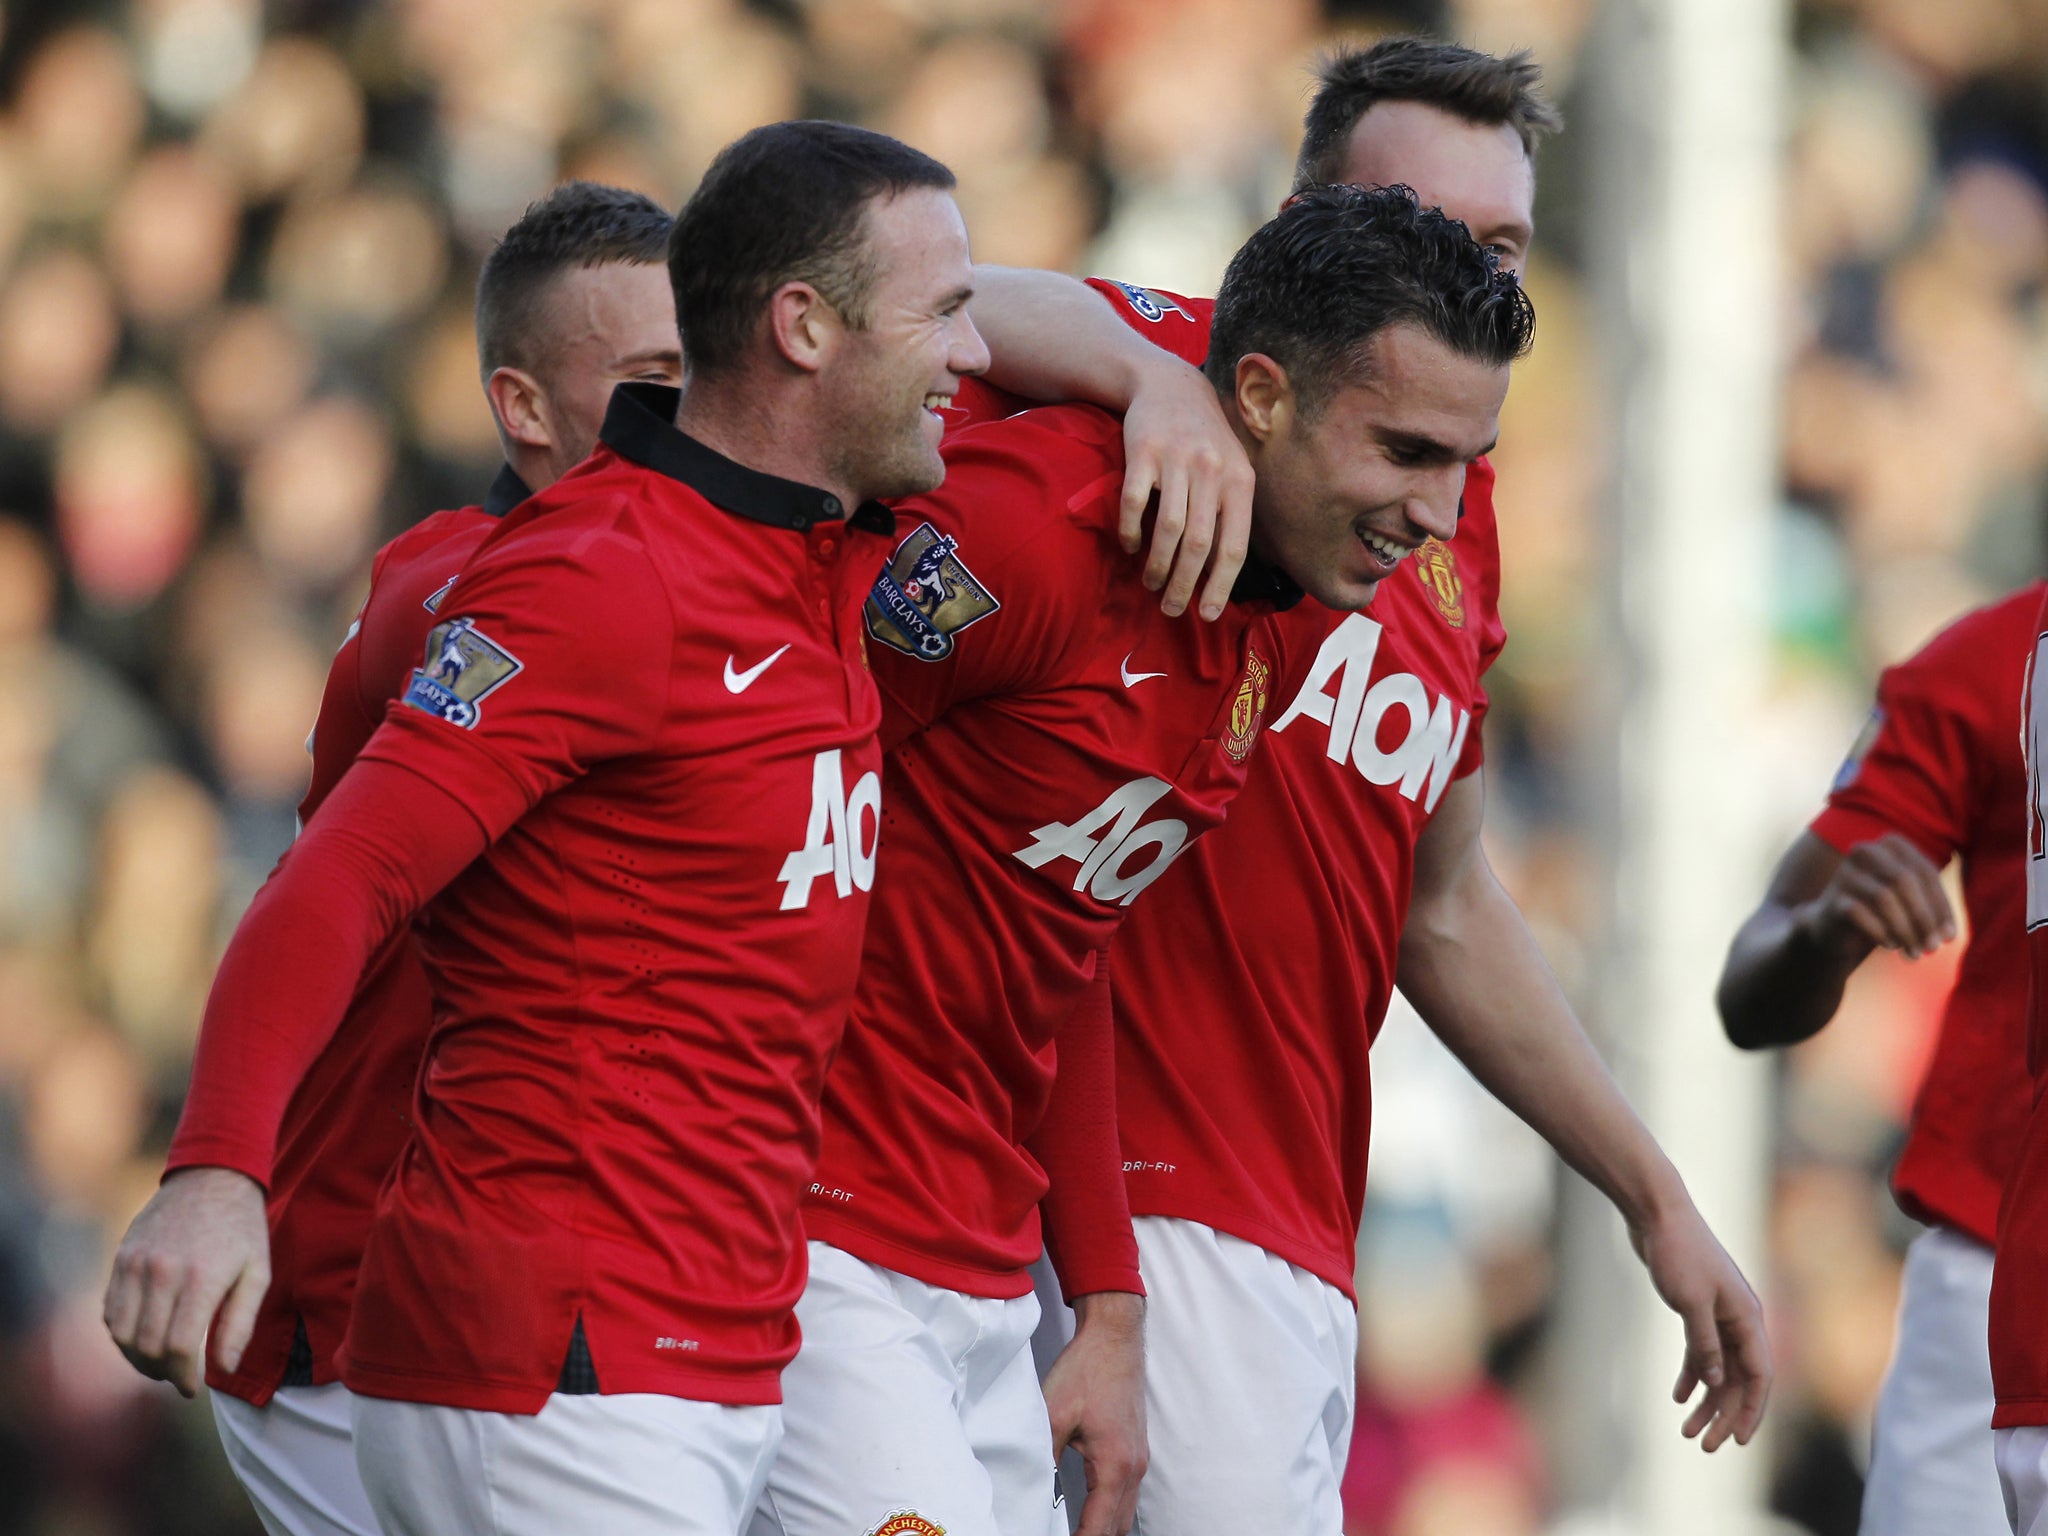 Wayne Rooney and Robin van Persie could both miss the New Year's Day fixture with Tottenham